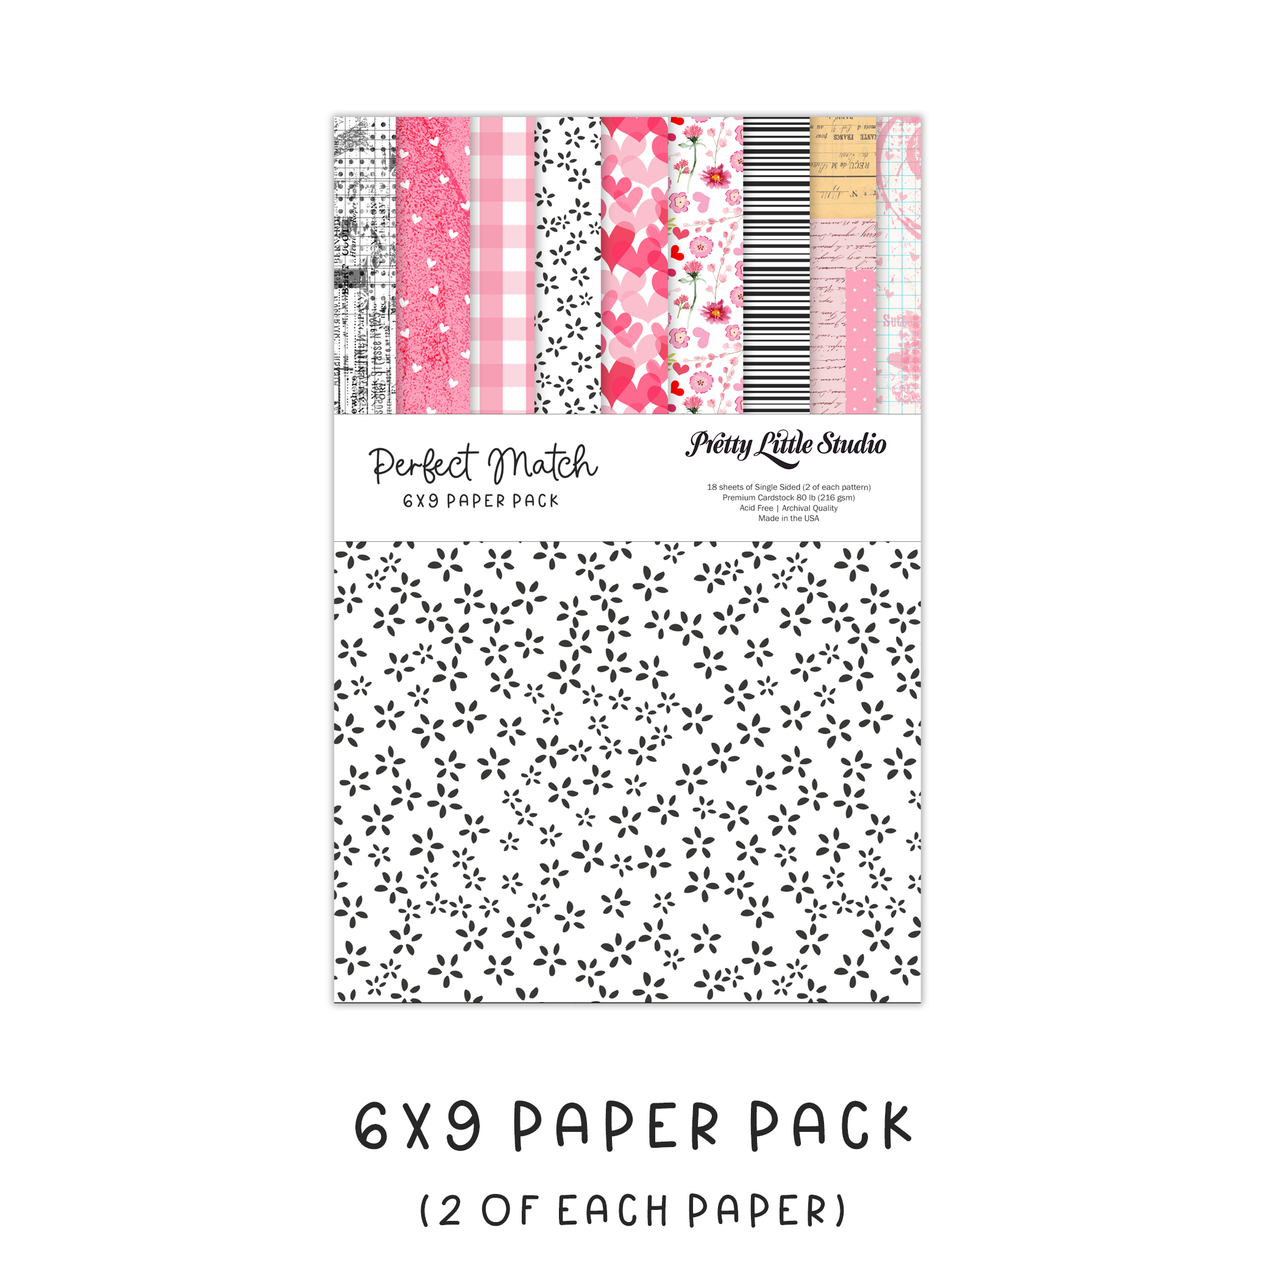 Perfect Match Lovely Lady Cardstock (24 Sheets): Papertrey Ink